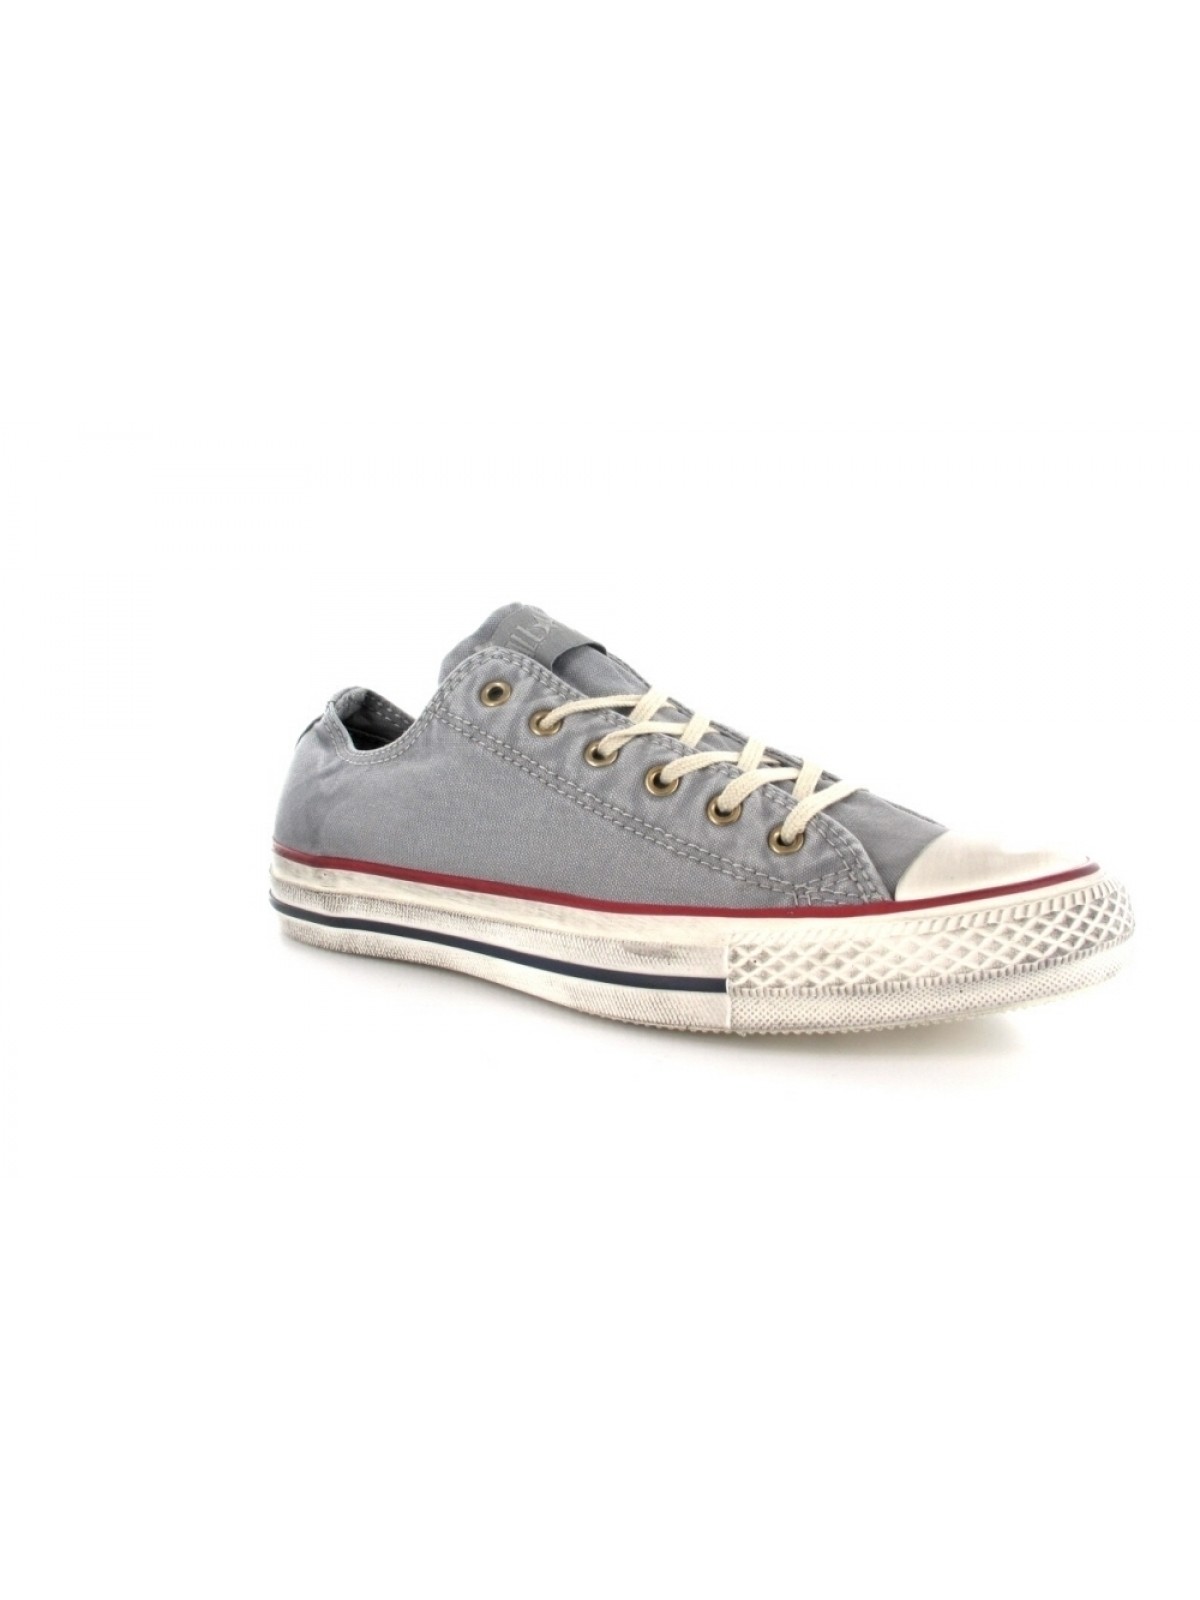 converse all star basse soldes